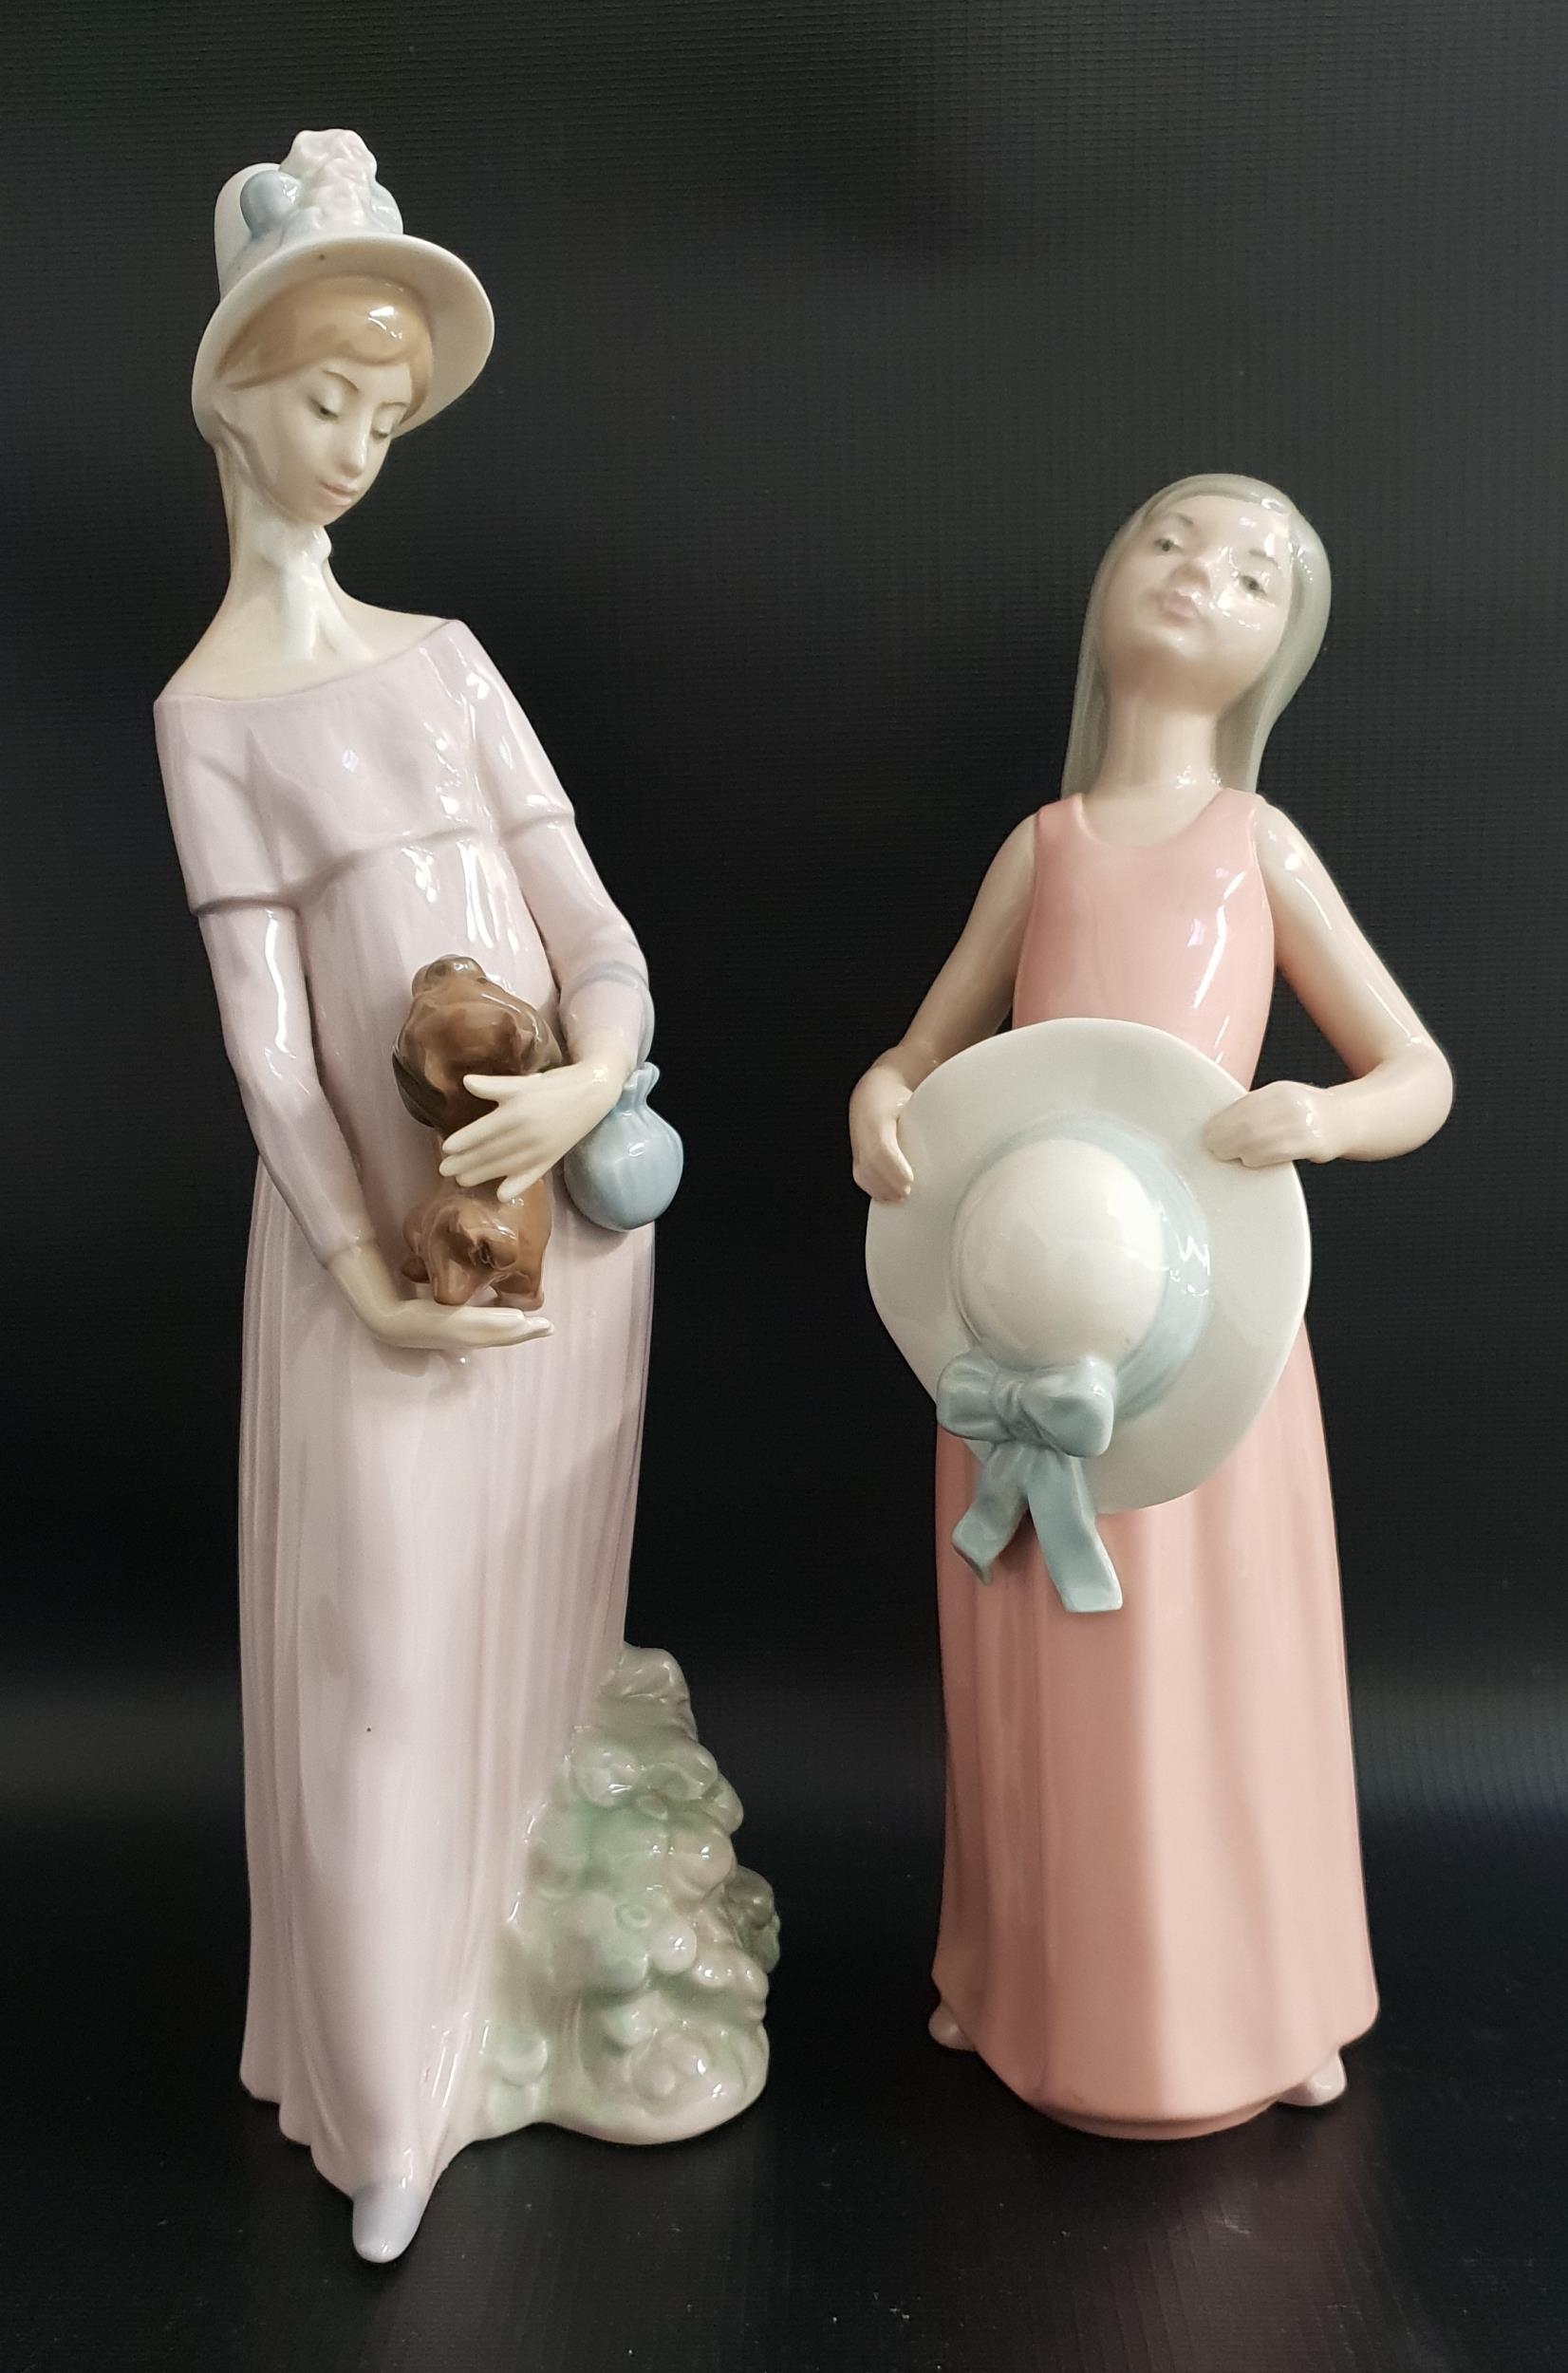 TWO LLADRO FIGURINES comprising The Dreamer, 5008, 25cm high and My Little Pet, 4994, 29.5cm high (